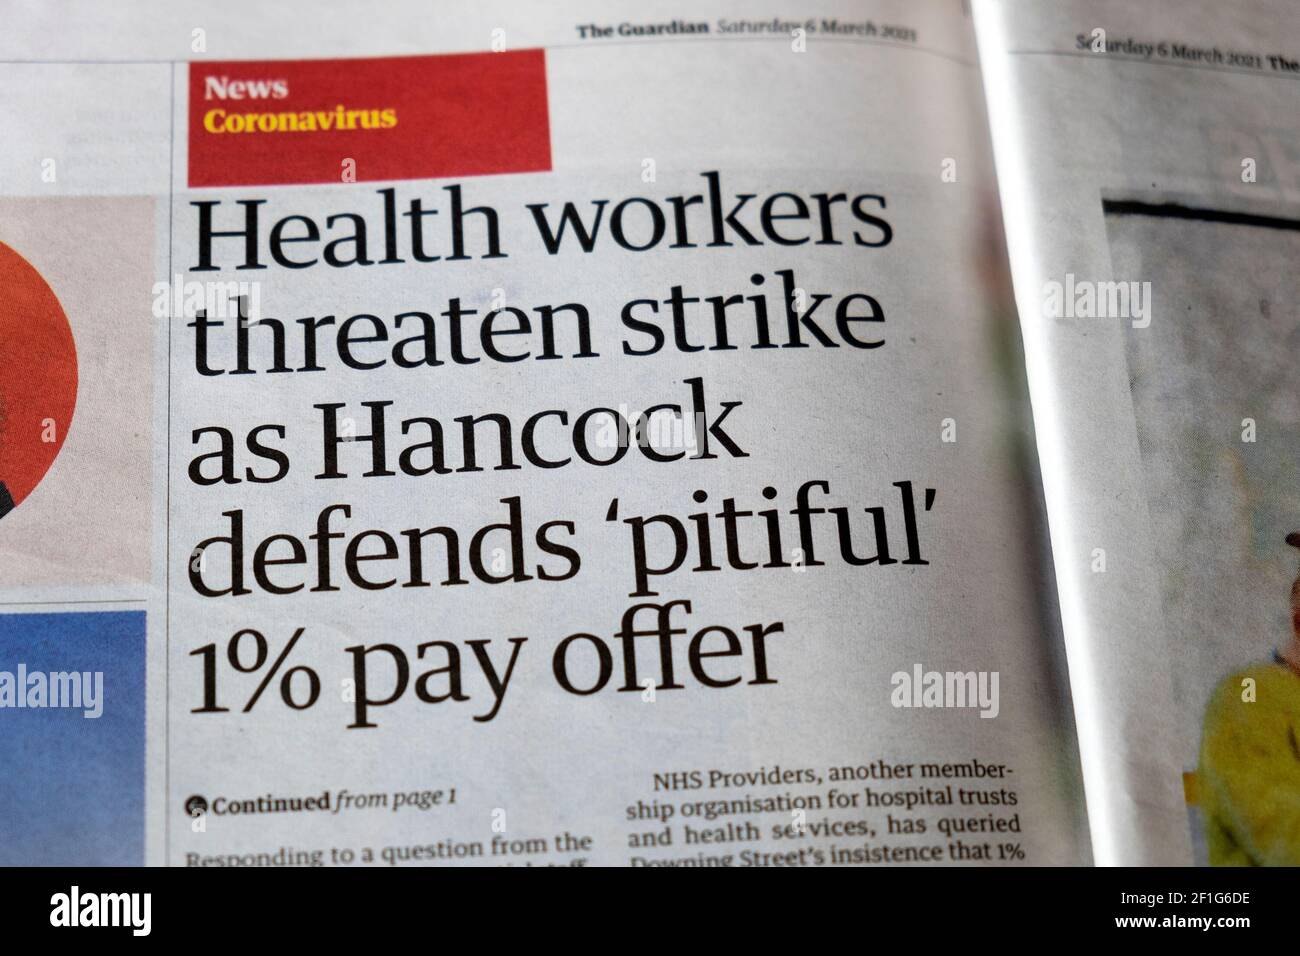 Coronavirus covid news 'Health workers threaten strike as Hancock defends 'pitiful' 1% pay offer' Guardian newspaper article 6 March 2021 London UK Stock Photo